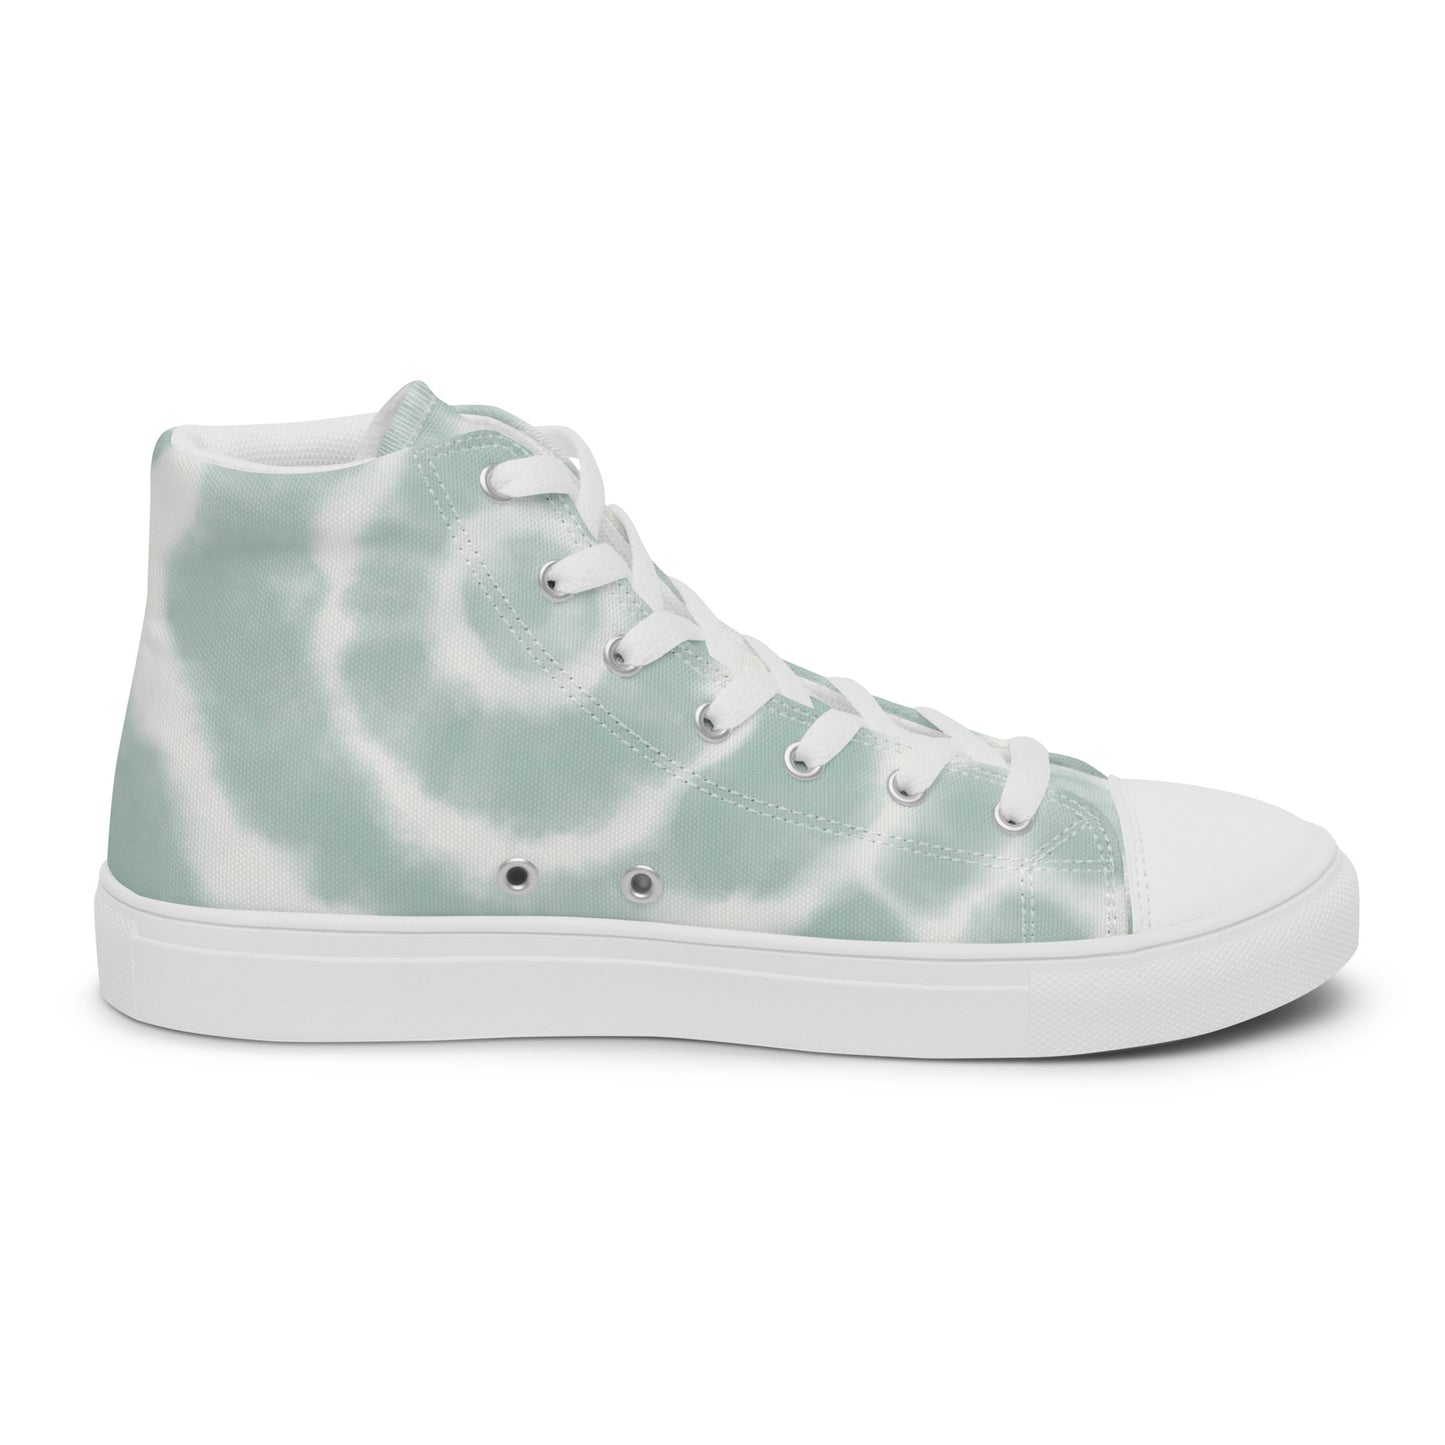 4th Edition: Women’s high top canvas shoes